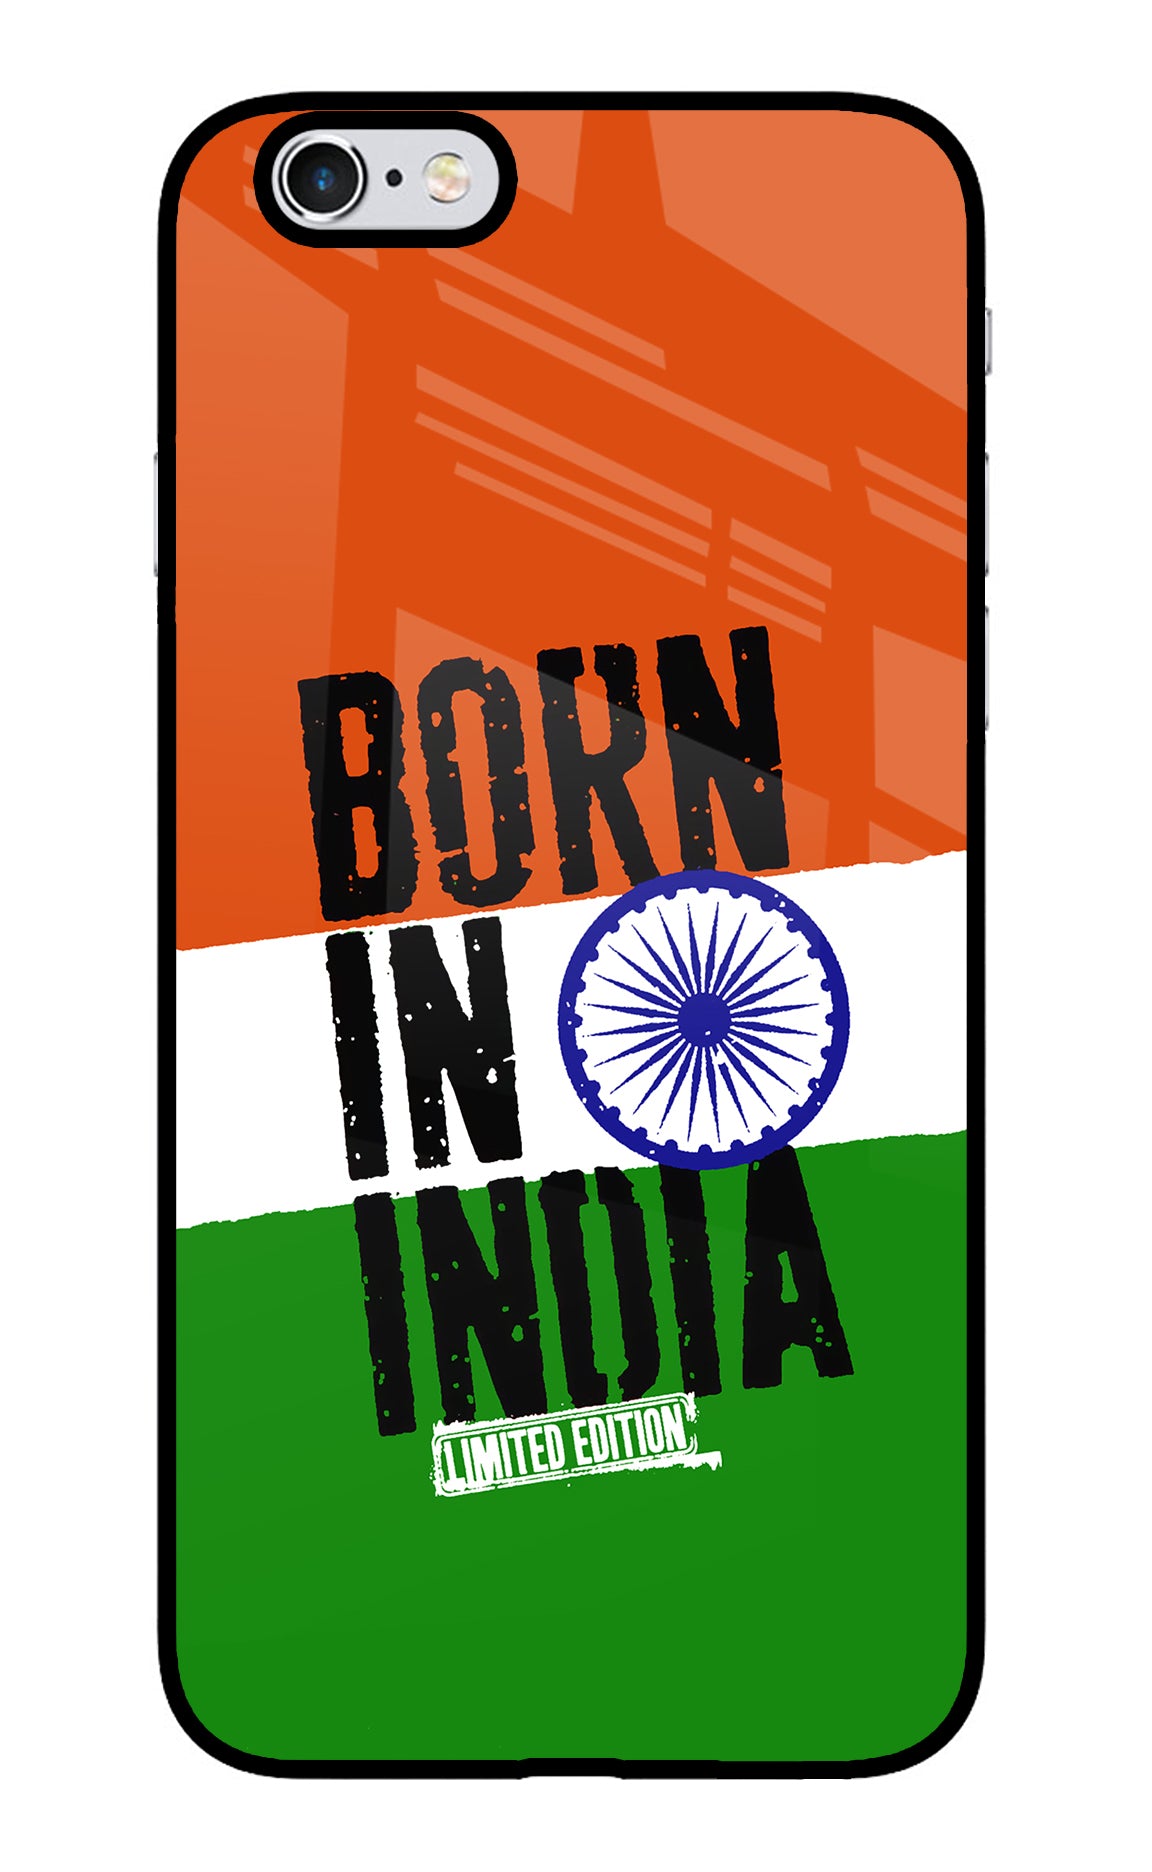 Born in India iPhone 6/6s Glass Case